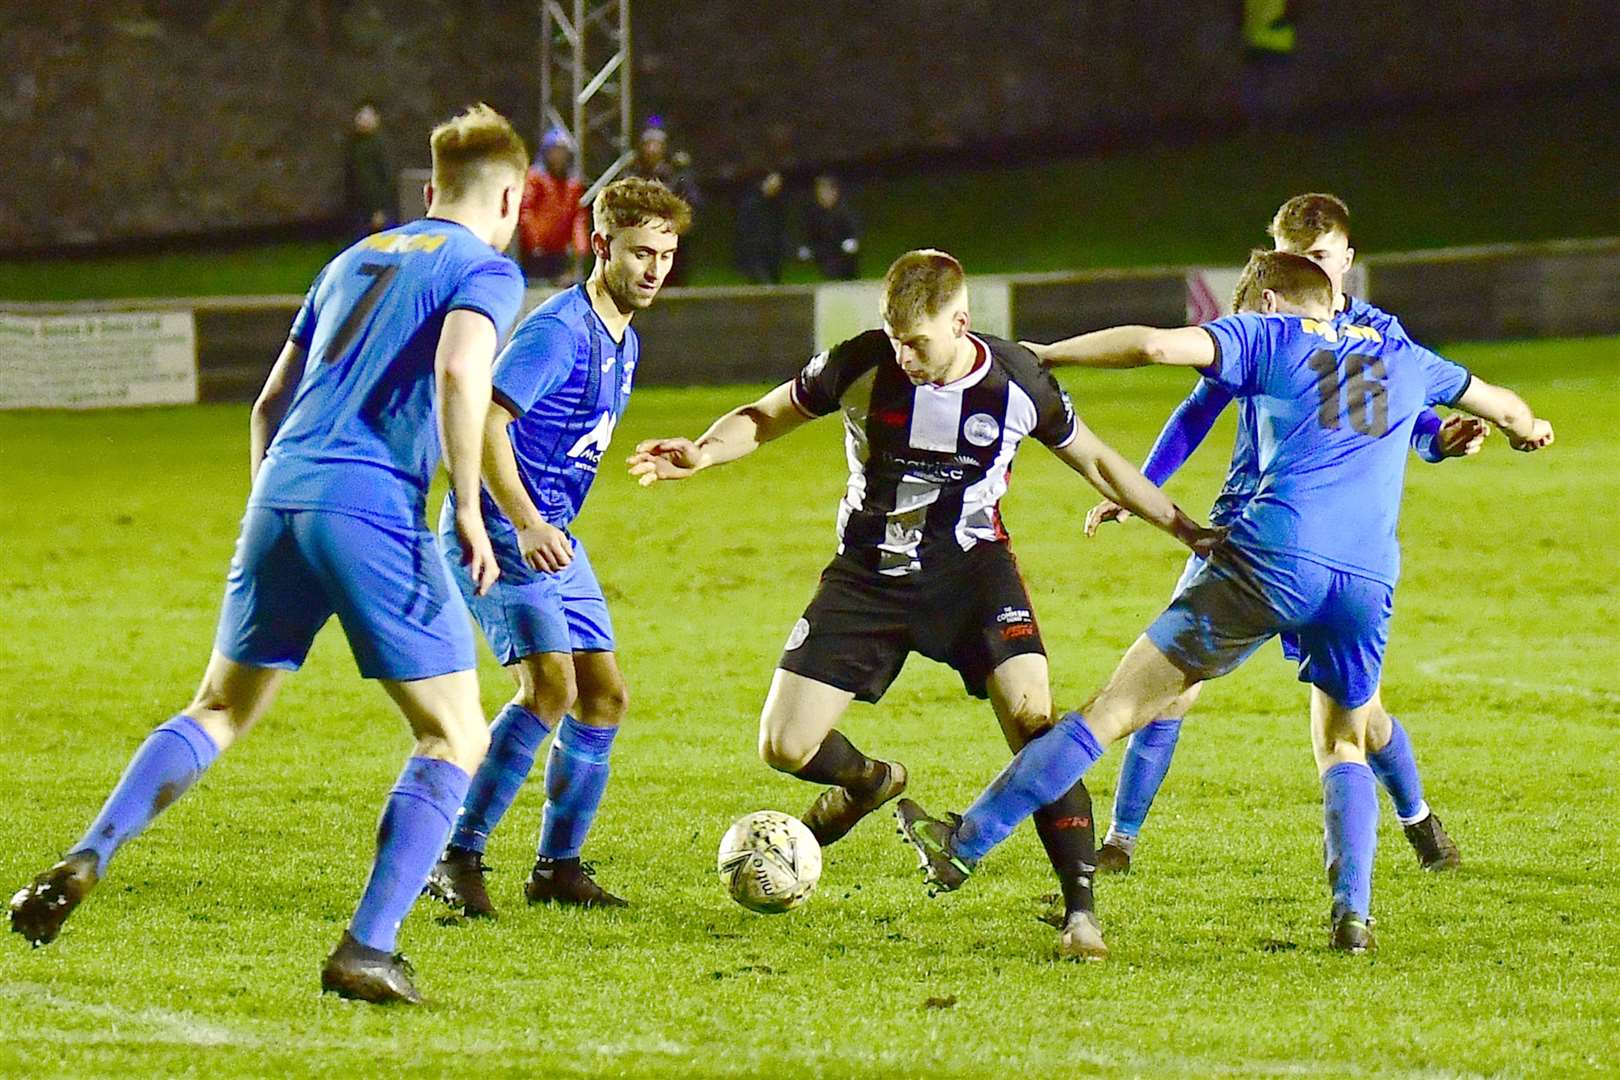 Marc Macgregor was the Wick Academy goalscorer in last season's 2-1 home defeat to Strathspey Thistle. Picture: Mel Roger